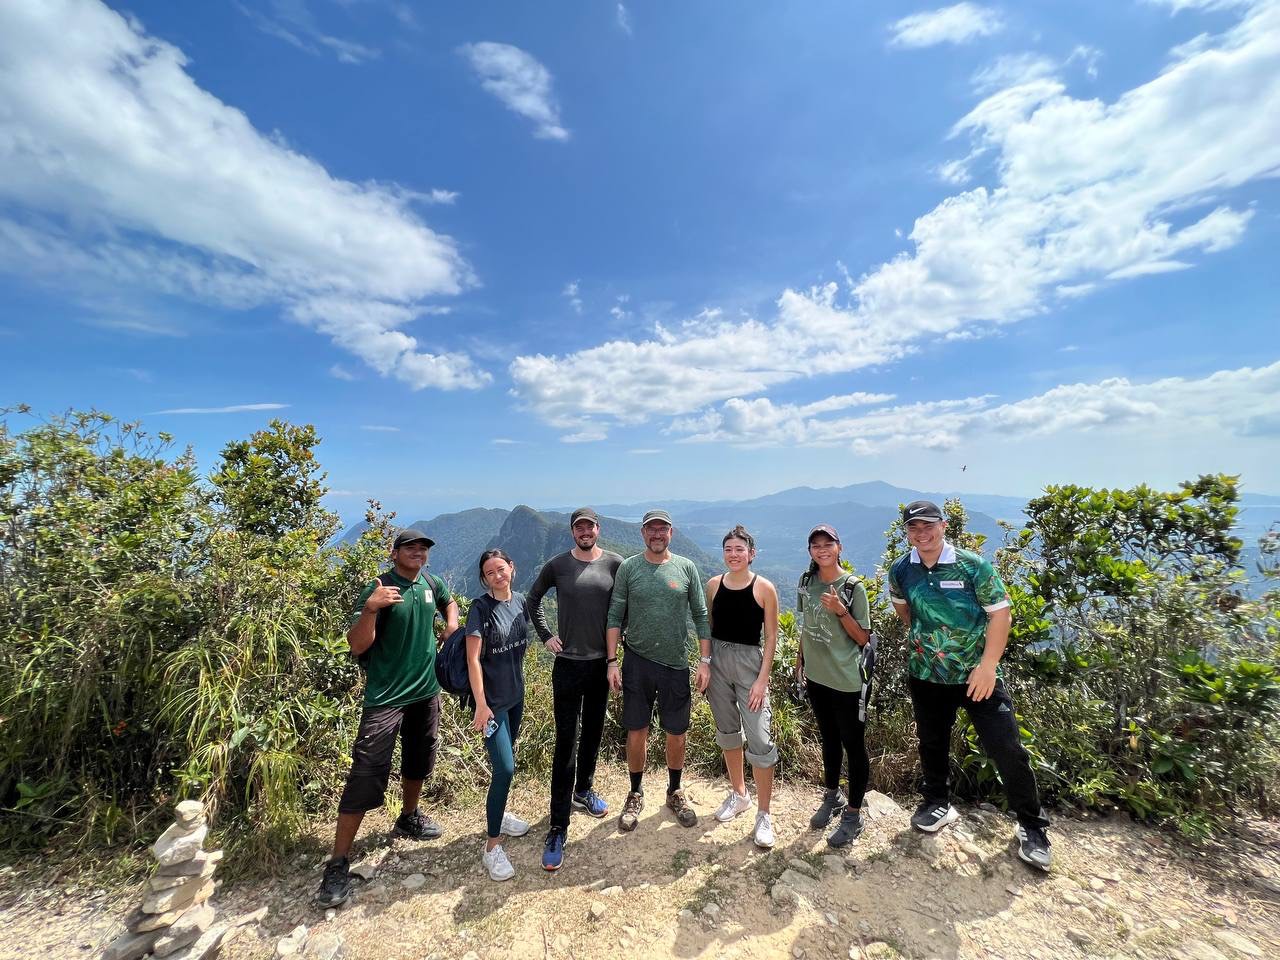 A tour group who have Trekked to the summit of Mount Matchincang Geoforest Park